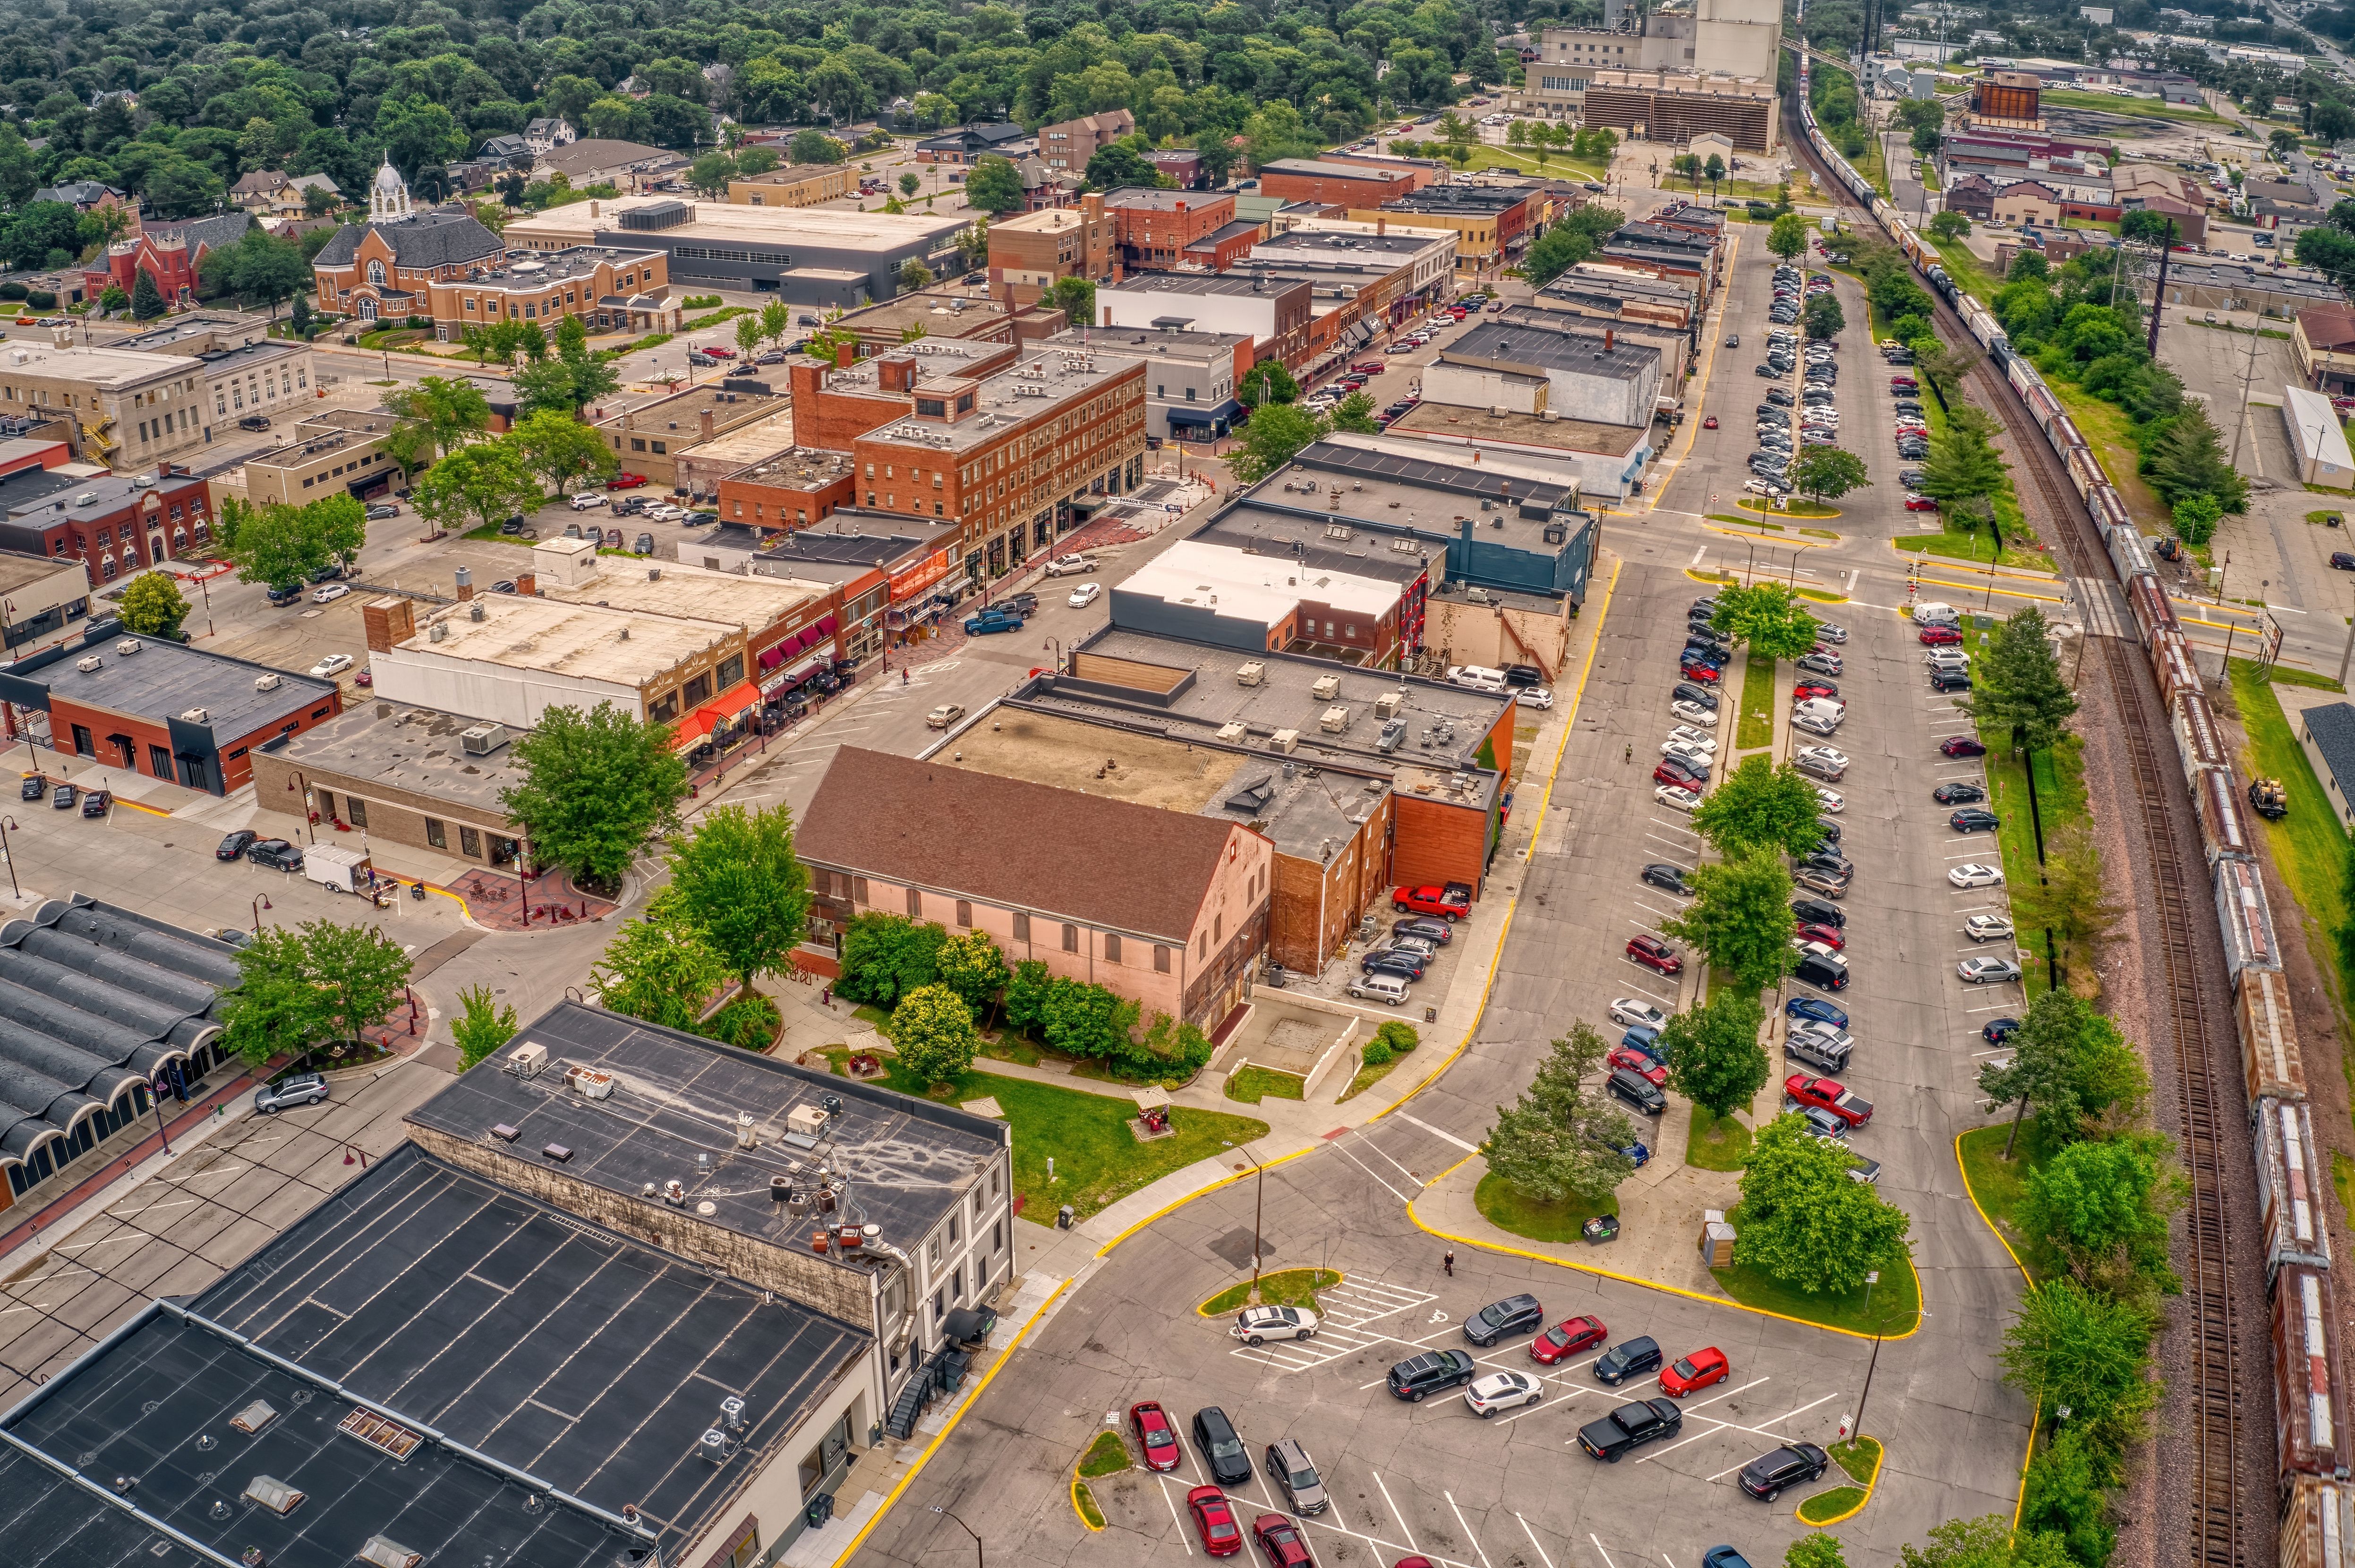 The aerial view of downtown Ames in the summer